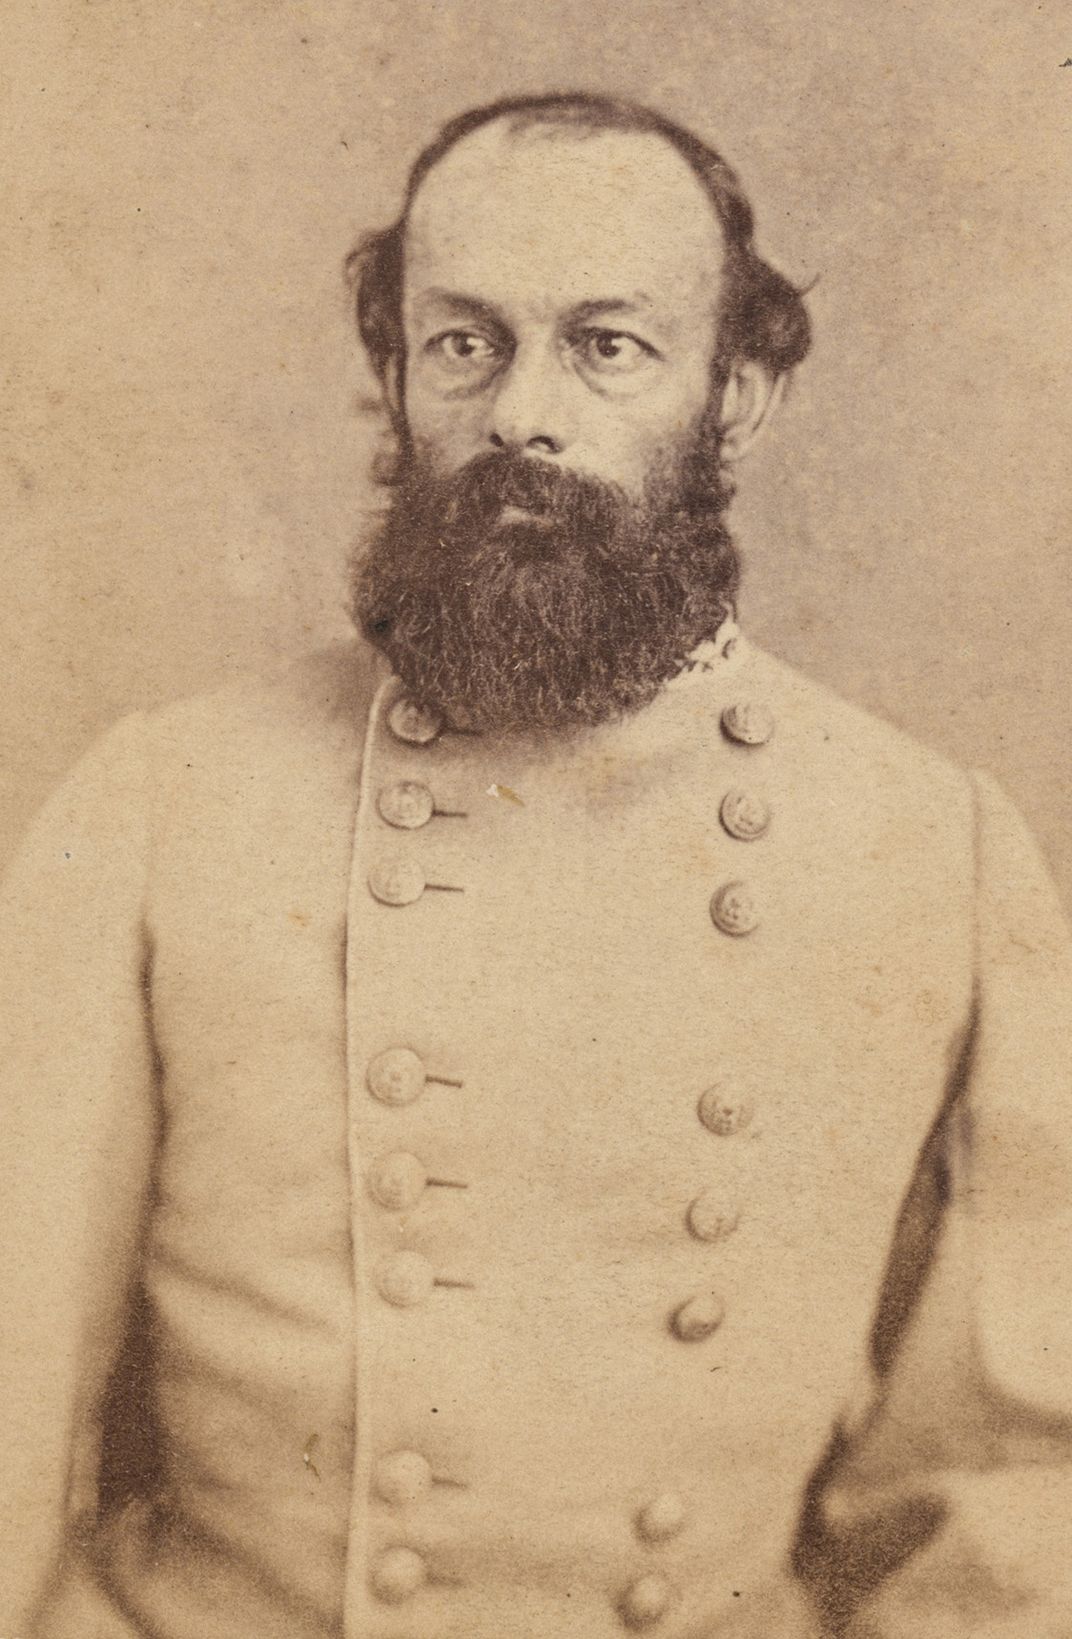 Edmund Kirby Smith, also pictured in his 40s, dressed in his Confederate uniform during the Civil War.